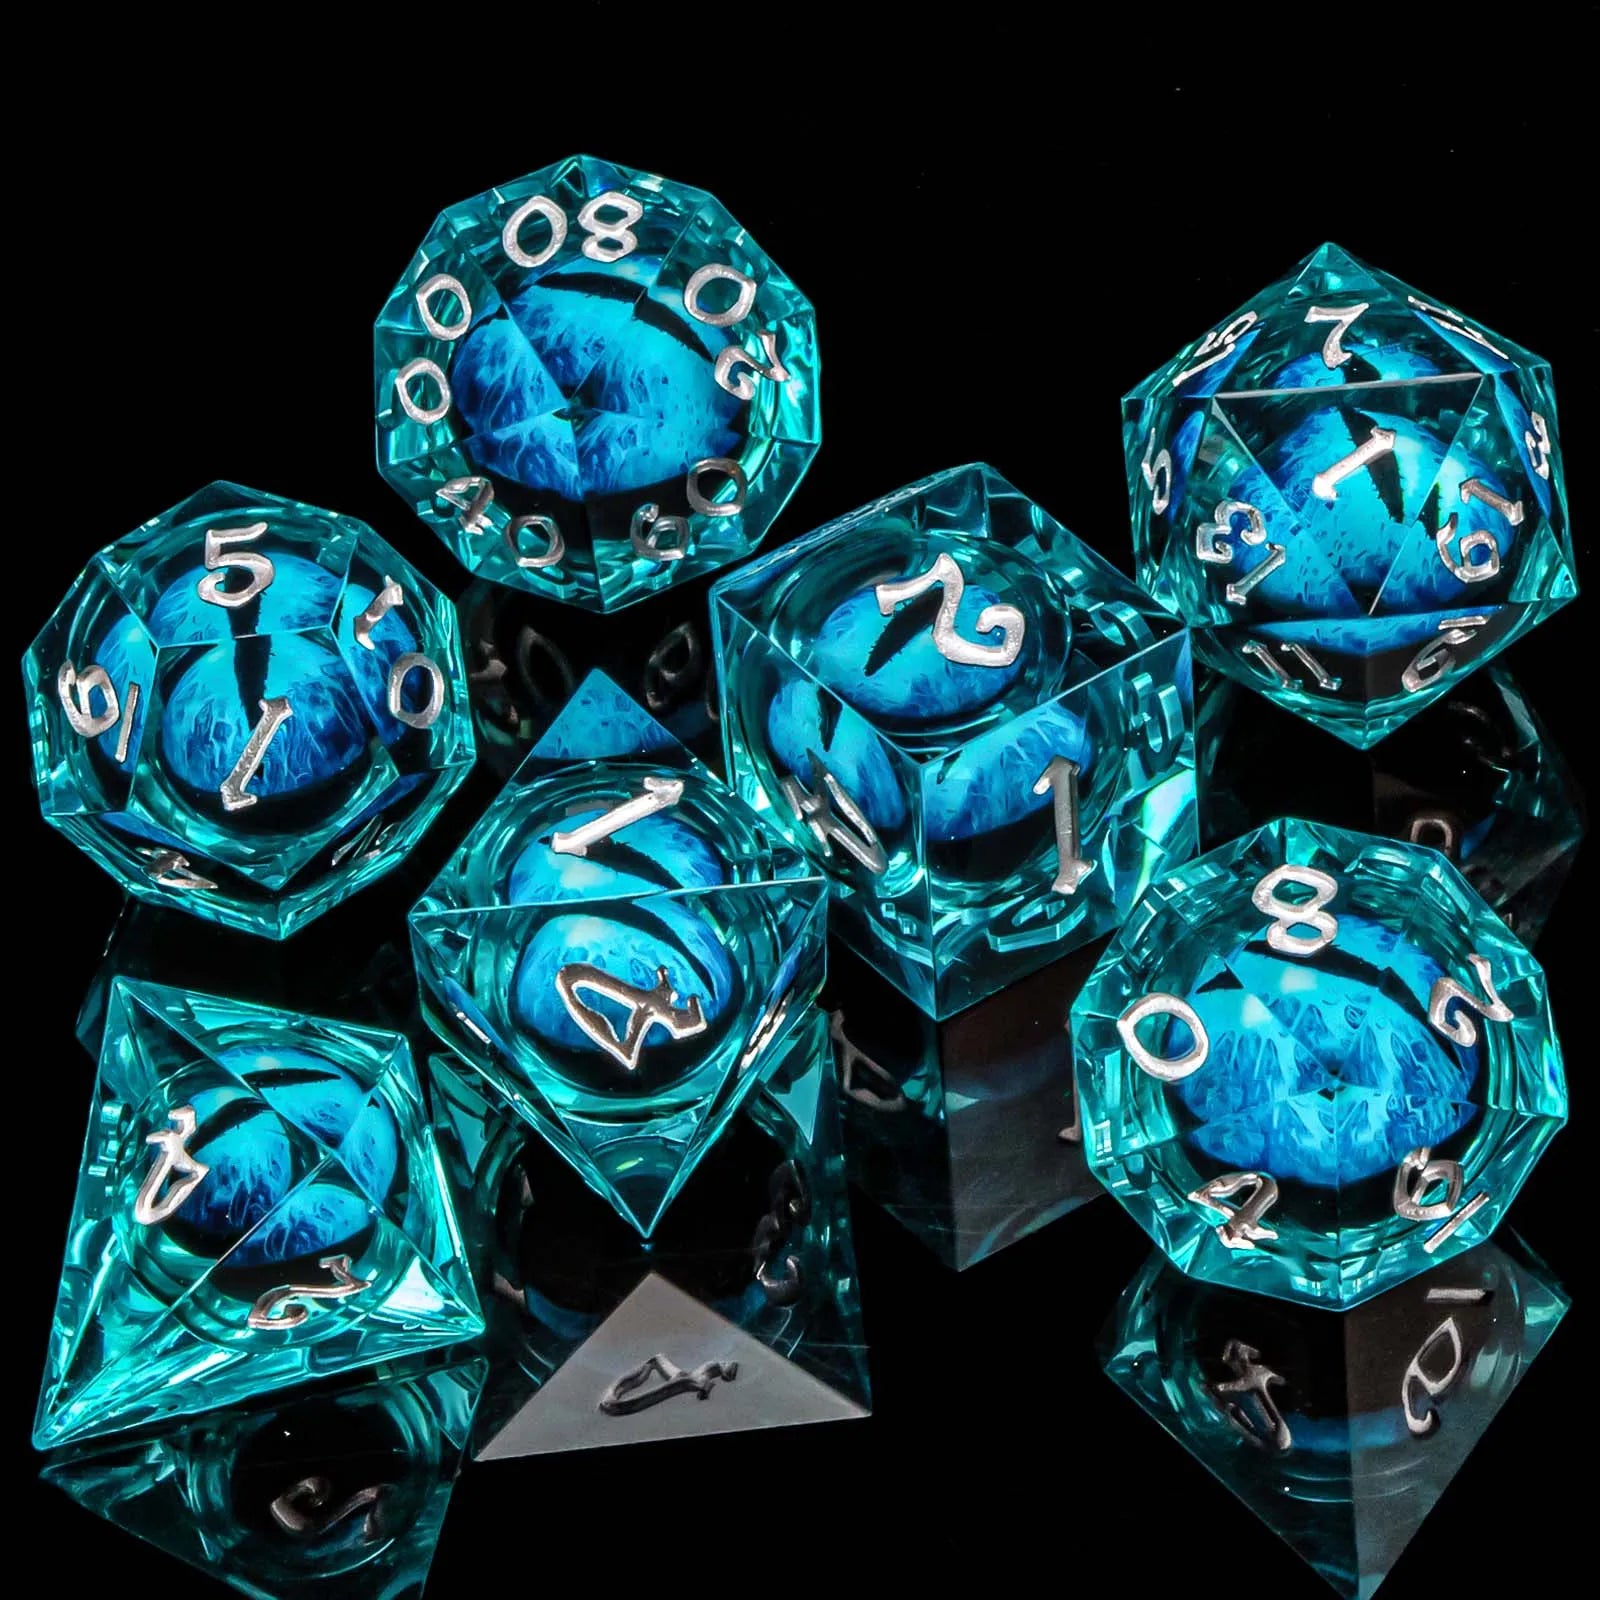 D and D Flowing Sand Sharp Edge Dragon Eye Dnd Resin RPG Polyhedral D&D Dice Set For Dungeon and Dragon Pathfinder Role Playing AZ16